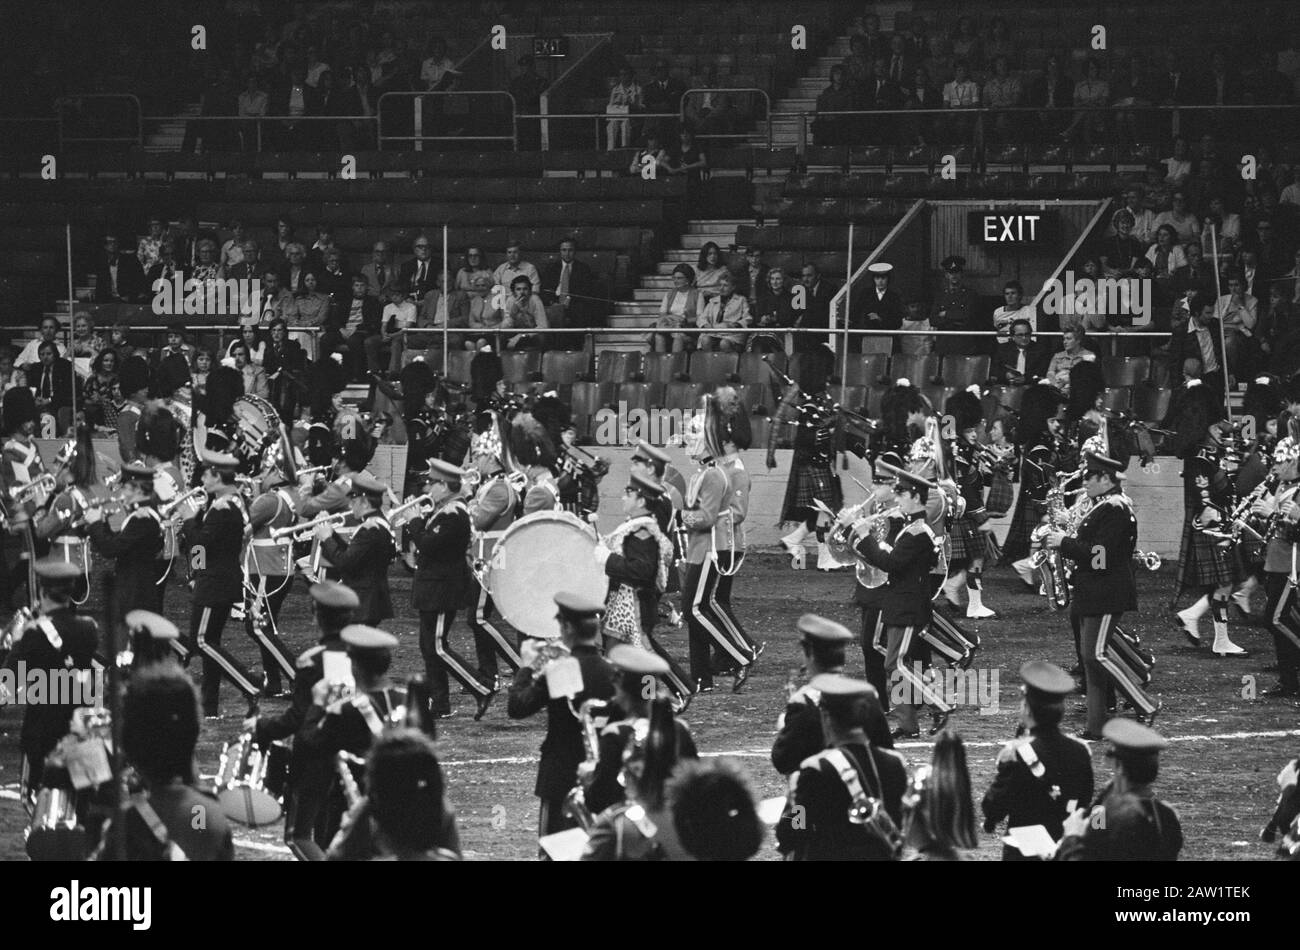 Marine Band im Royal Tournament at Earls Court Exhibition Building in London Performance by the Royal Artilley Band and Pipes Datum: 17. Juli 1975 Ort: UK, London Schlagwörter: Soldaten , Musikwettbewerbe, Bands Institution Name: Marine Band of the Royal Navy Stockfoto